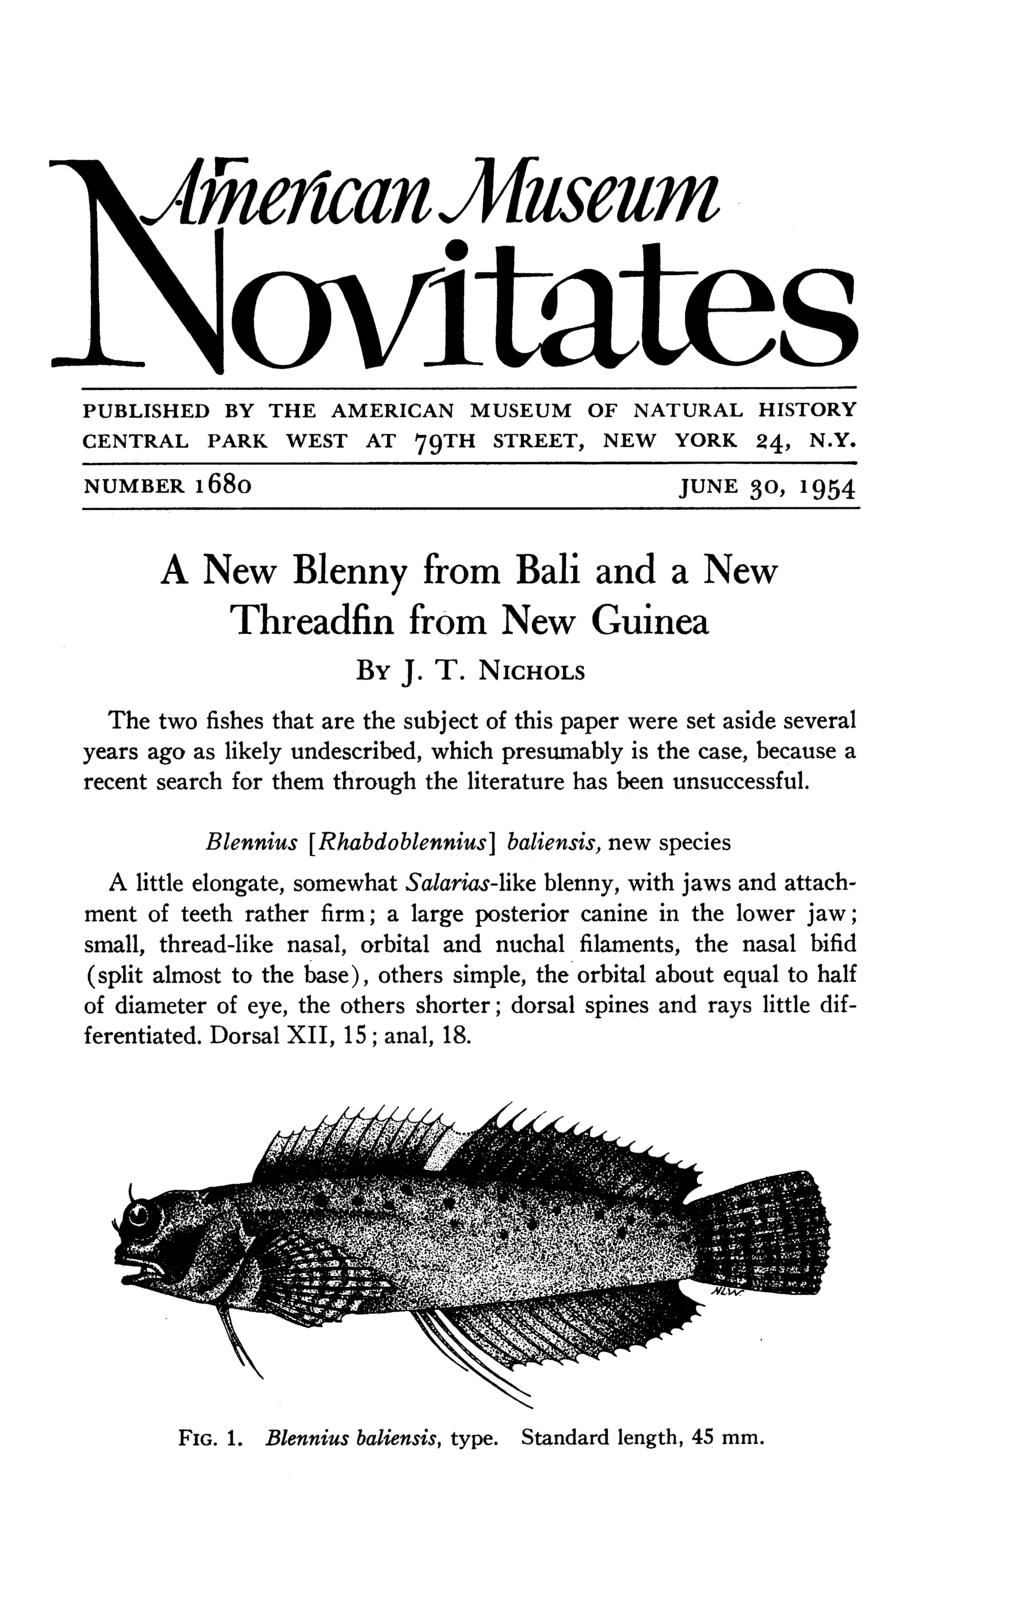 AMiiiui?can JMllselIm oxfitates PUBLISHED BY THE AMERICAN MUSEUM OF NATURAL HISTORY CENTRAL PARK WEST AT 79TH STREET, NEW YORK 24, N.Y. NUMBER i68o JUNE 30, 1954 A New Blenny from Bali and a New Threadfin from New Guinea BY J.